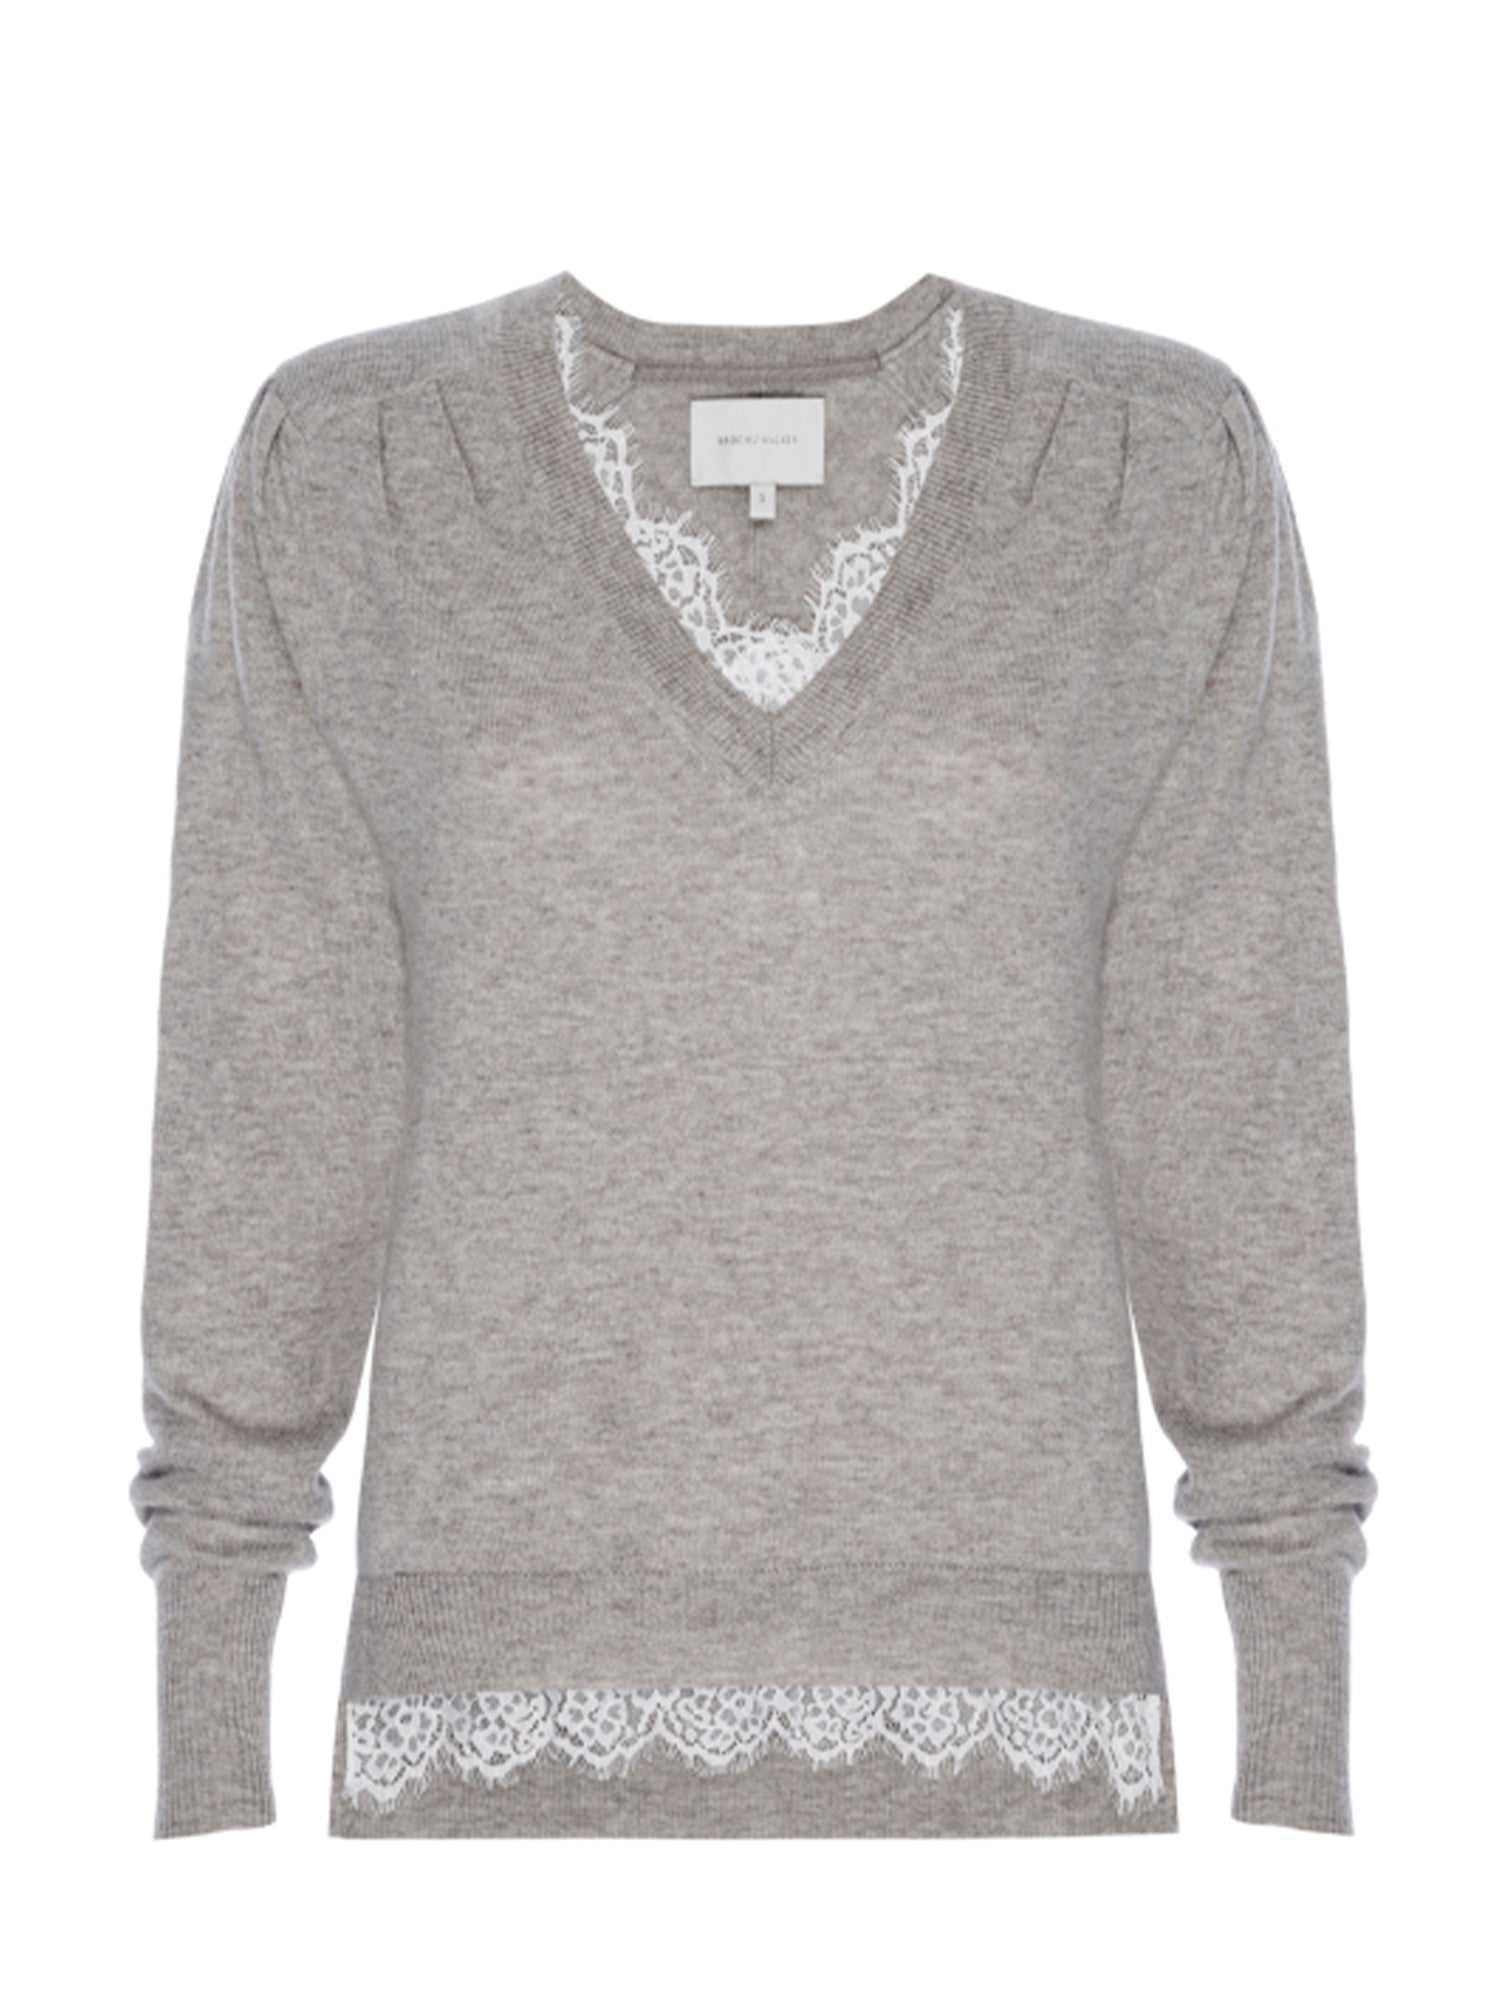 Marcella light grey lace layered v-neck sweater flat view